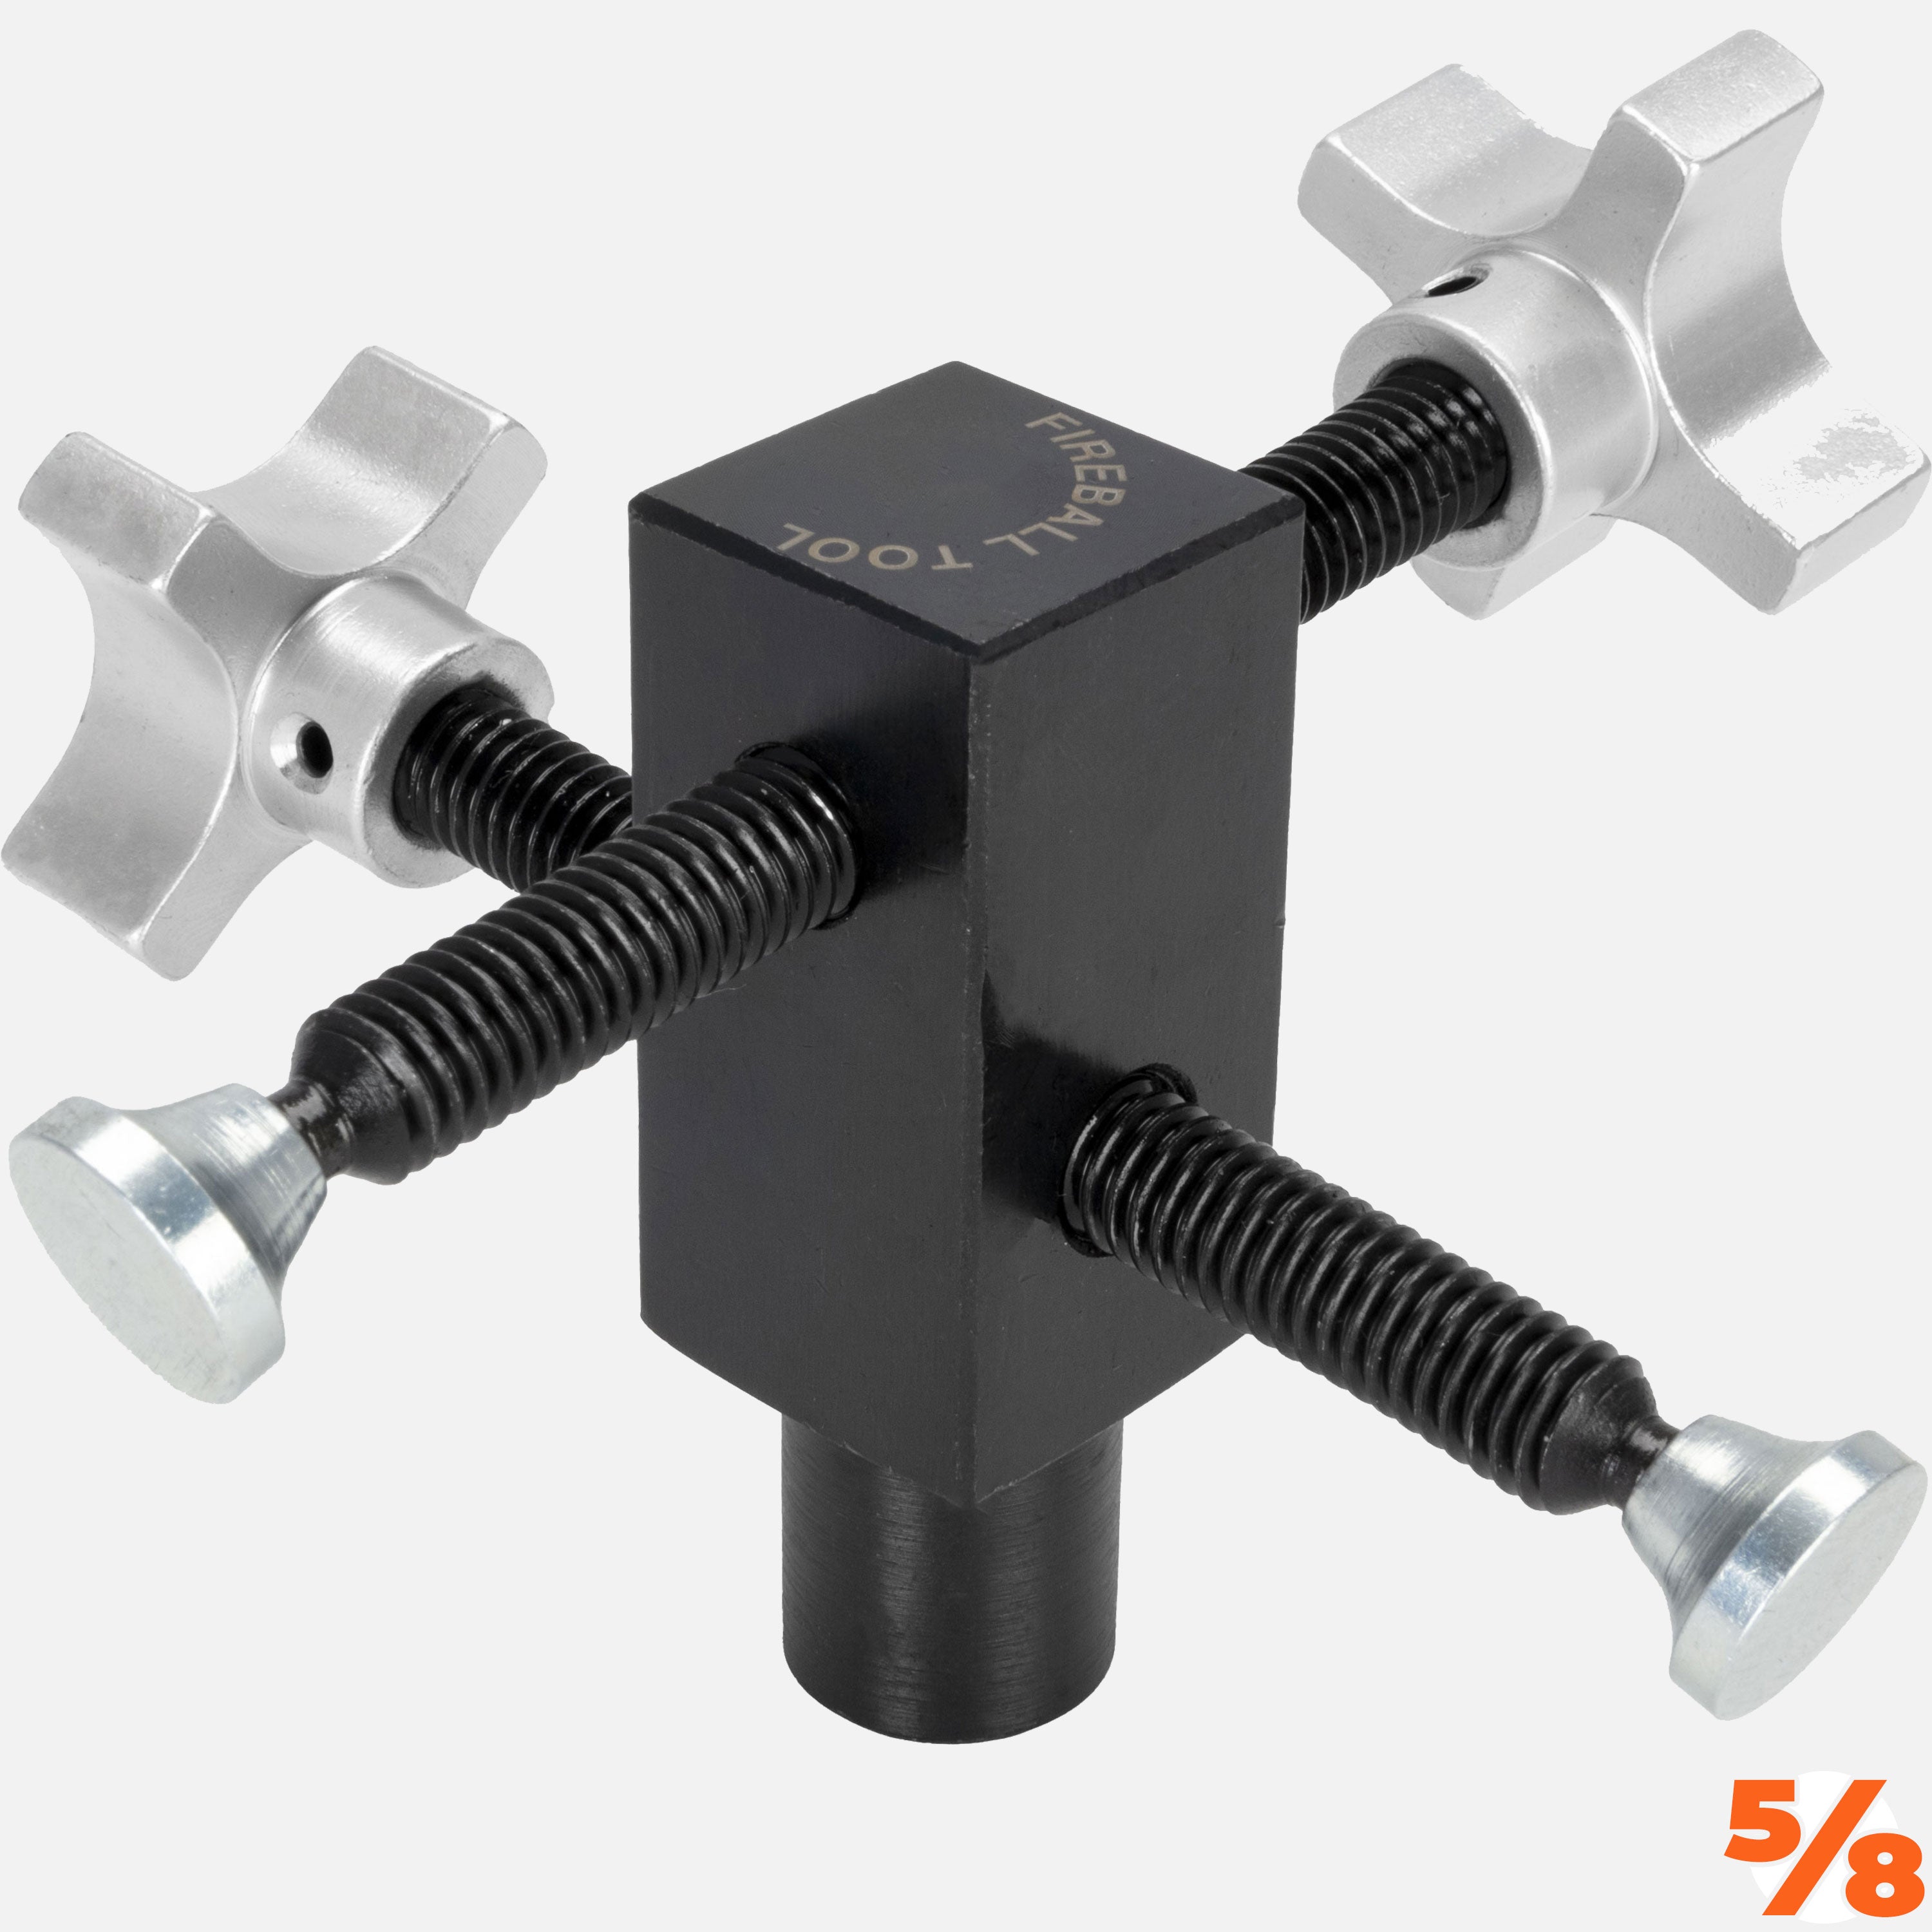 Side Push Clamp - 5/8" System